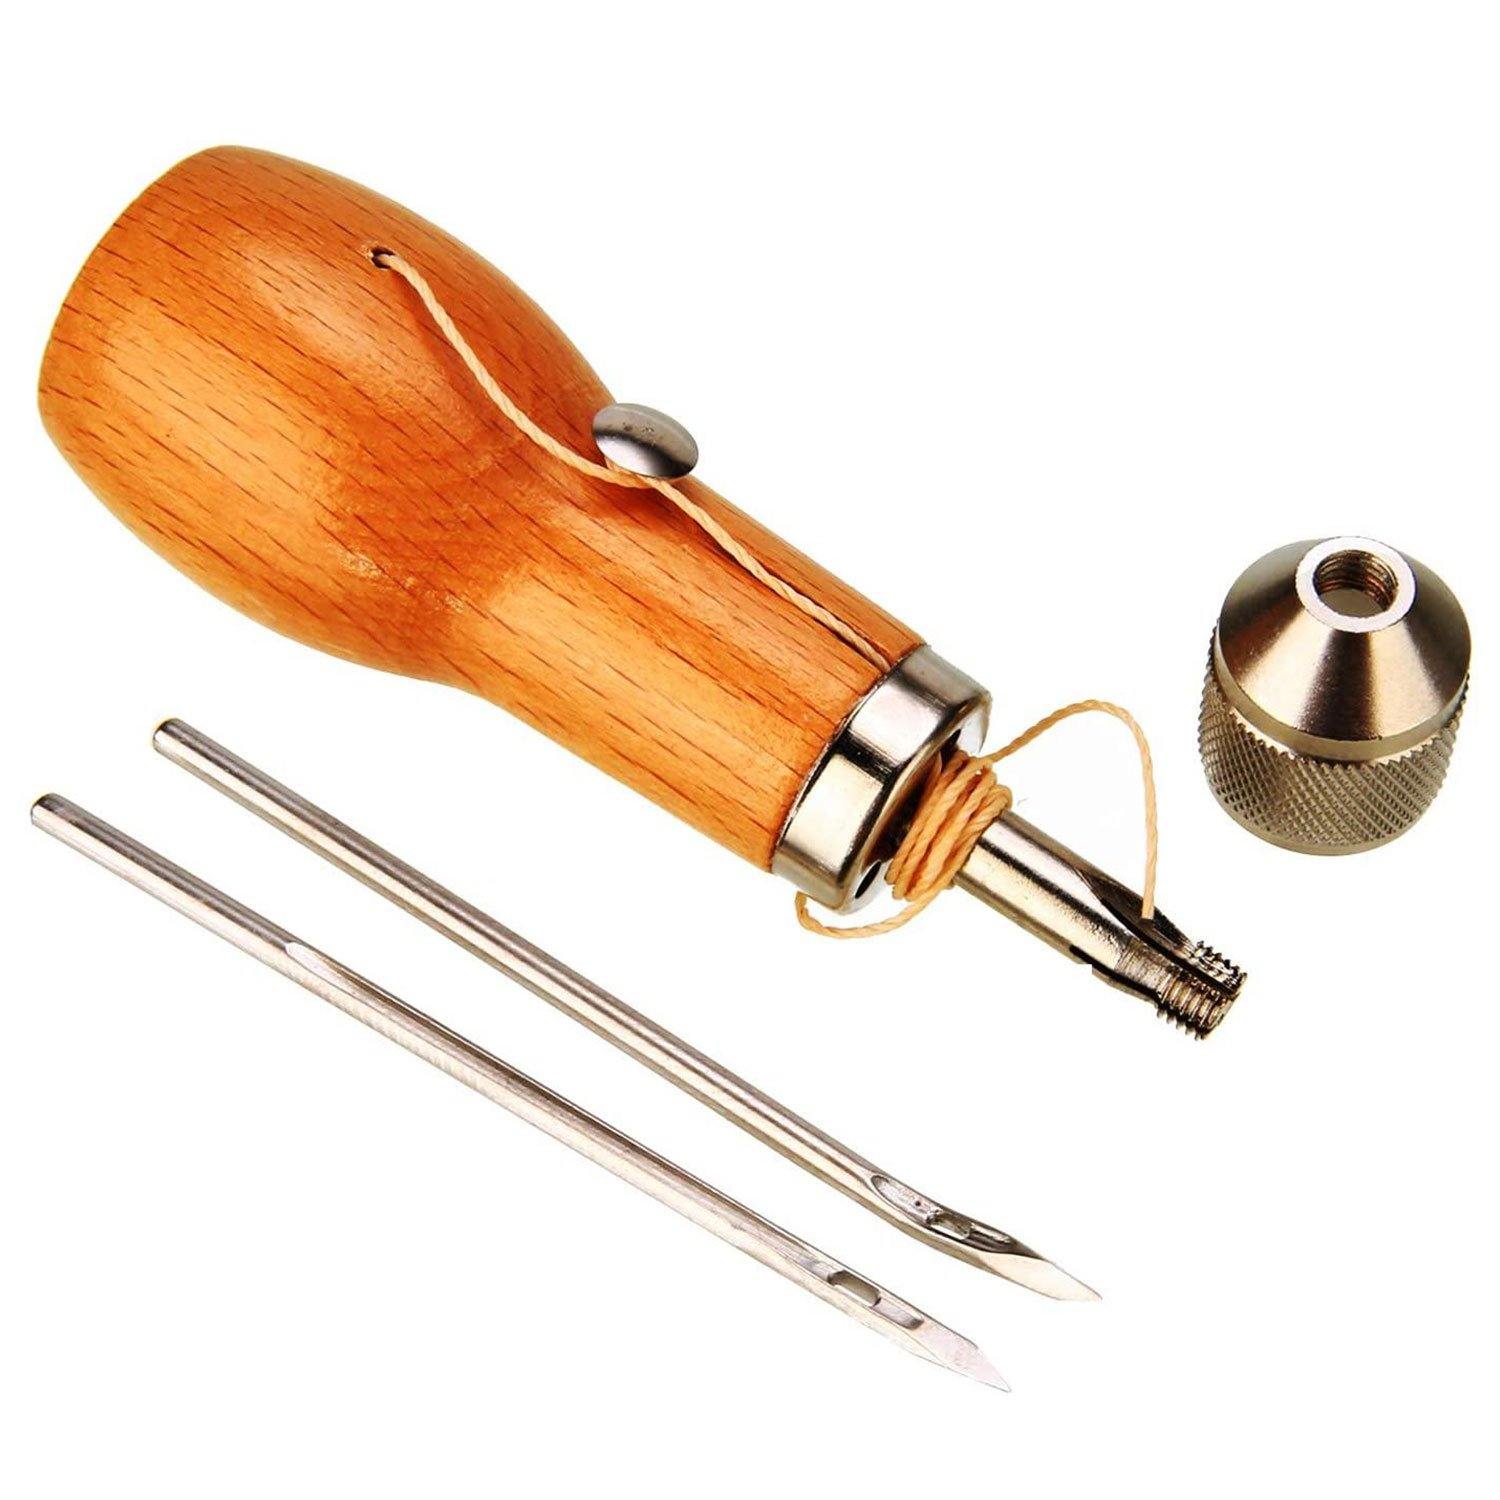 A Tool for Working Leather, Webbing, Canvas, Etc. by Hand: The Speedy  Stitcher Sewing Awl - Core77